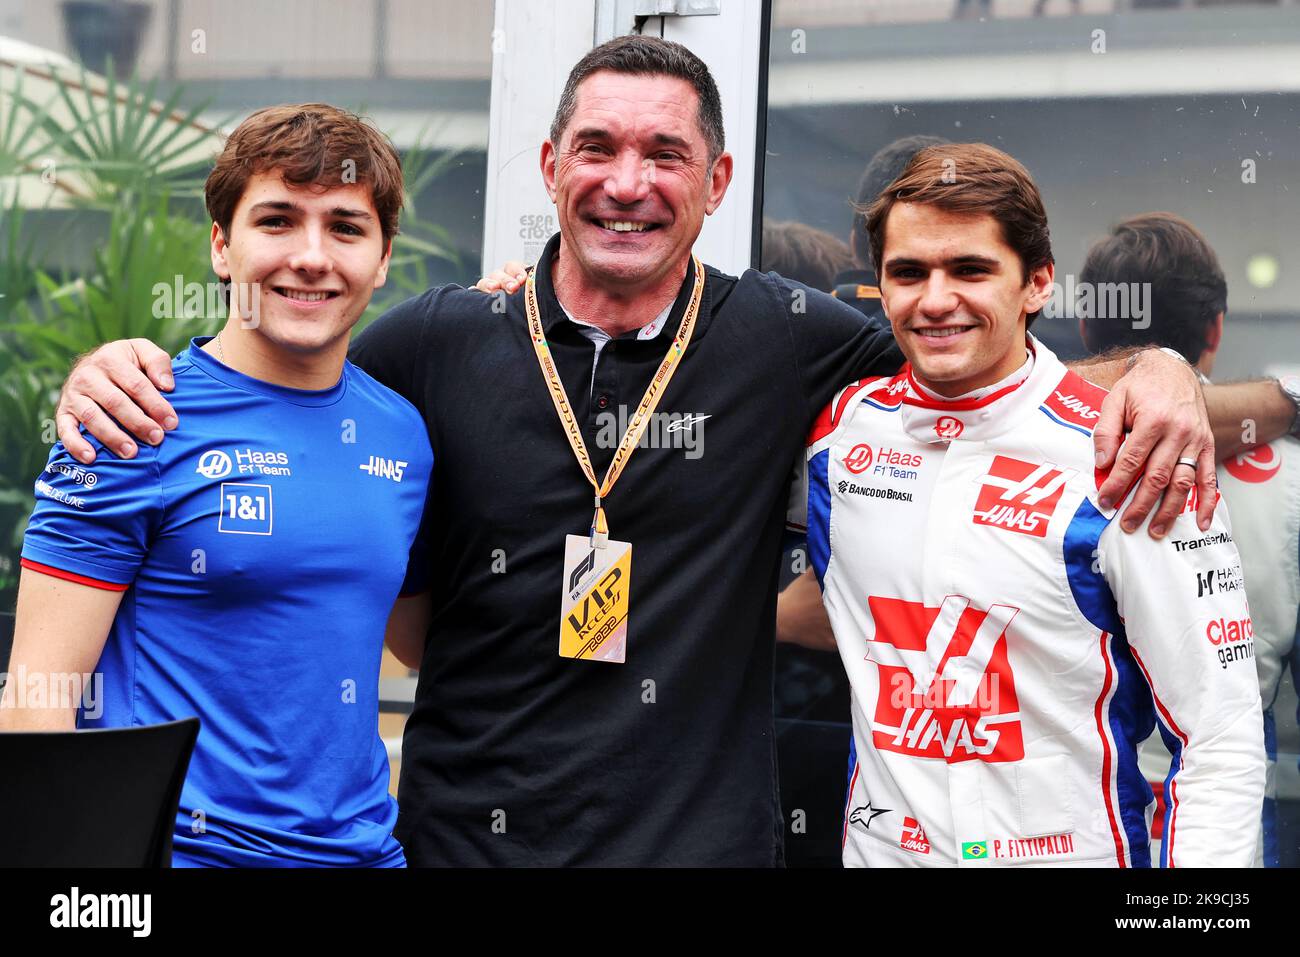 Mexico City, Mexico. 27th Oct, 2022. (L to R): Enzo Fittiapldi (BRA) Ferrari Academy Driver with Max Papis (ITA) and Pietro Fittipaldi (BRA) Haas F1 Team Reserve Driver. Mexican Grand Prix, Thursday 27th October 2022. Mexico City, Mexico. Credit: James Moy/Alamy Live News Stock Photo